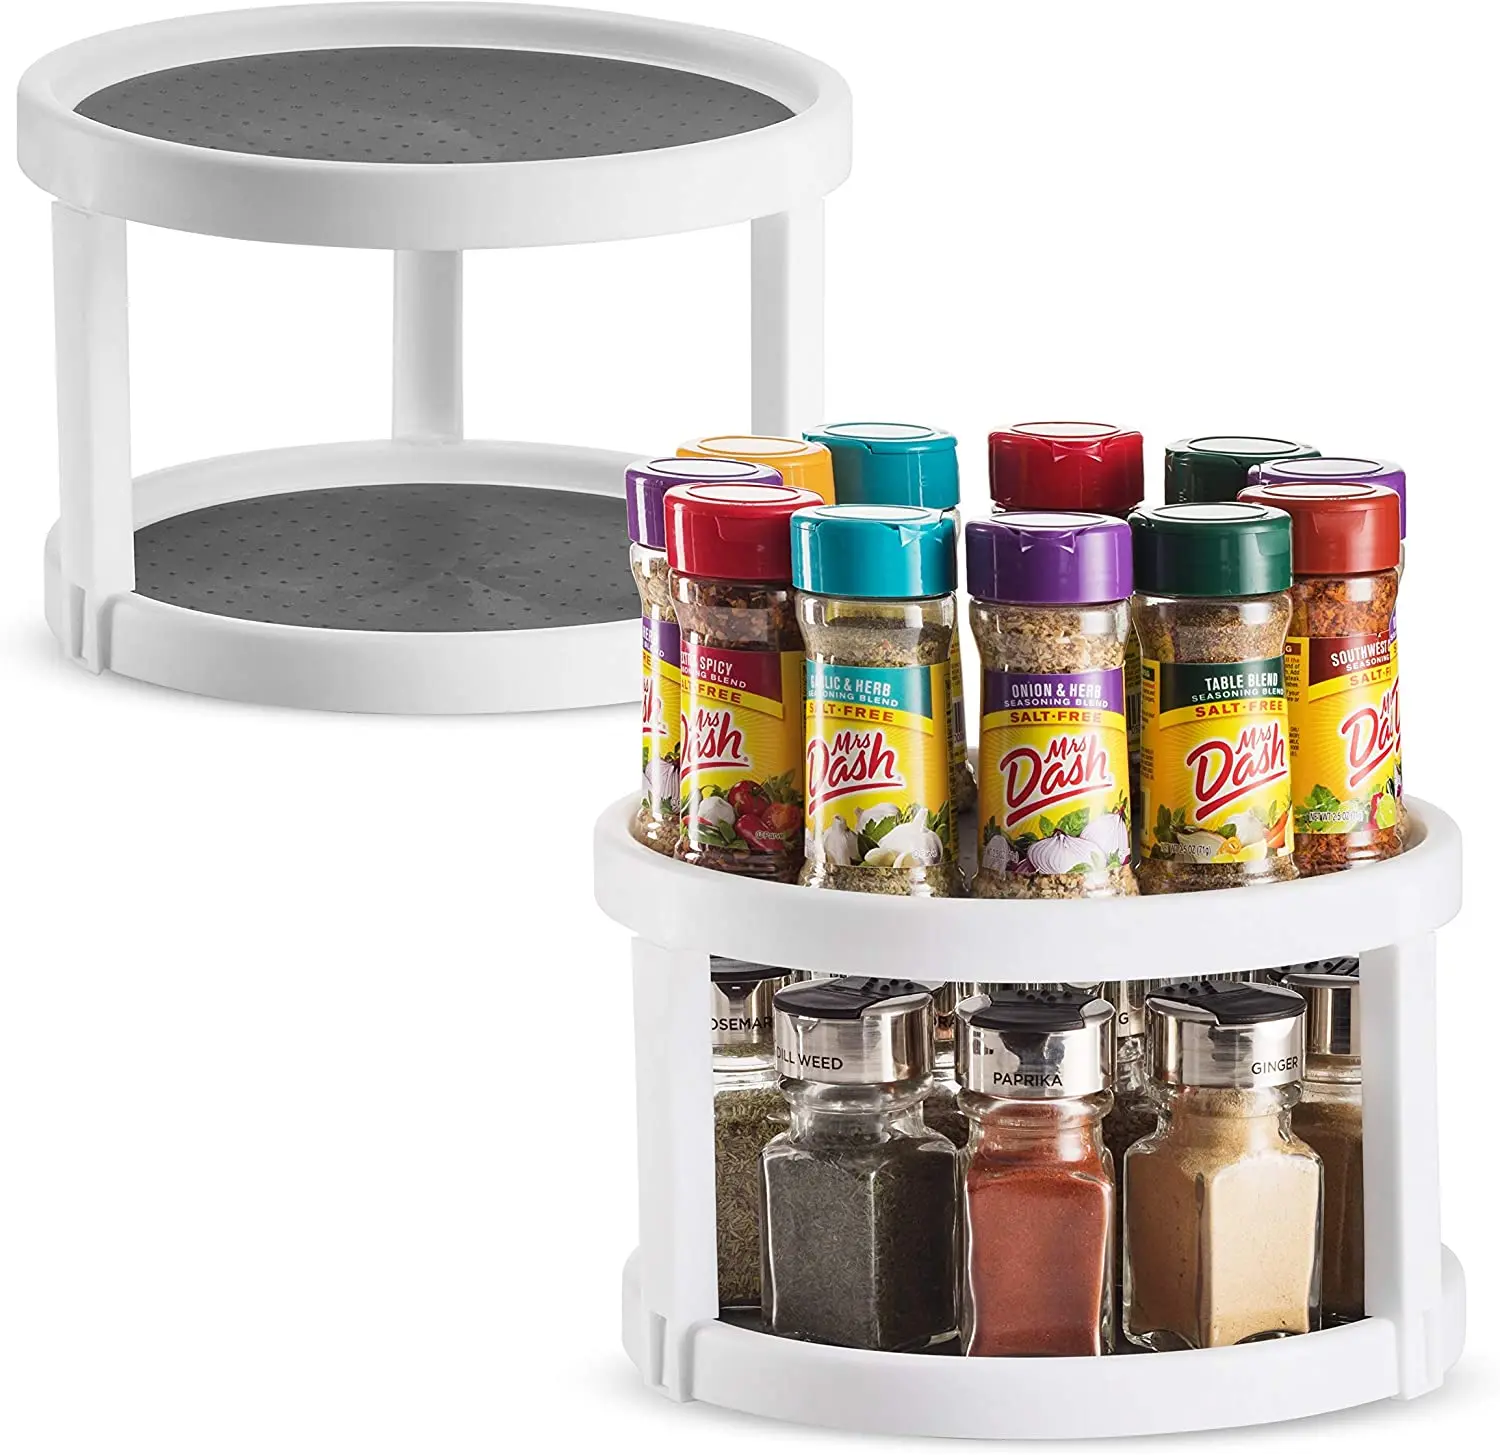 

Amazon Hot Selling 2 Tier Non Skid Lazy Susan Turntable Cabinet Organizer 2 Tier  360 Degree Rotating Spice Rack, White/grey